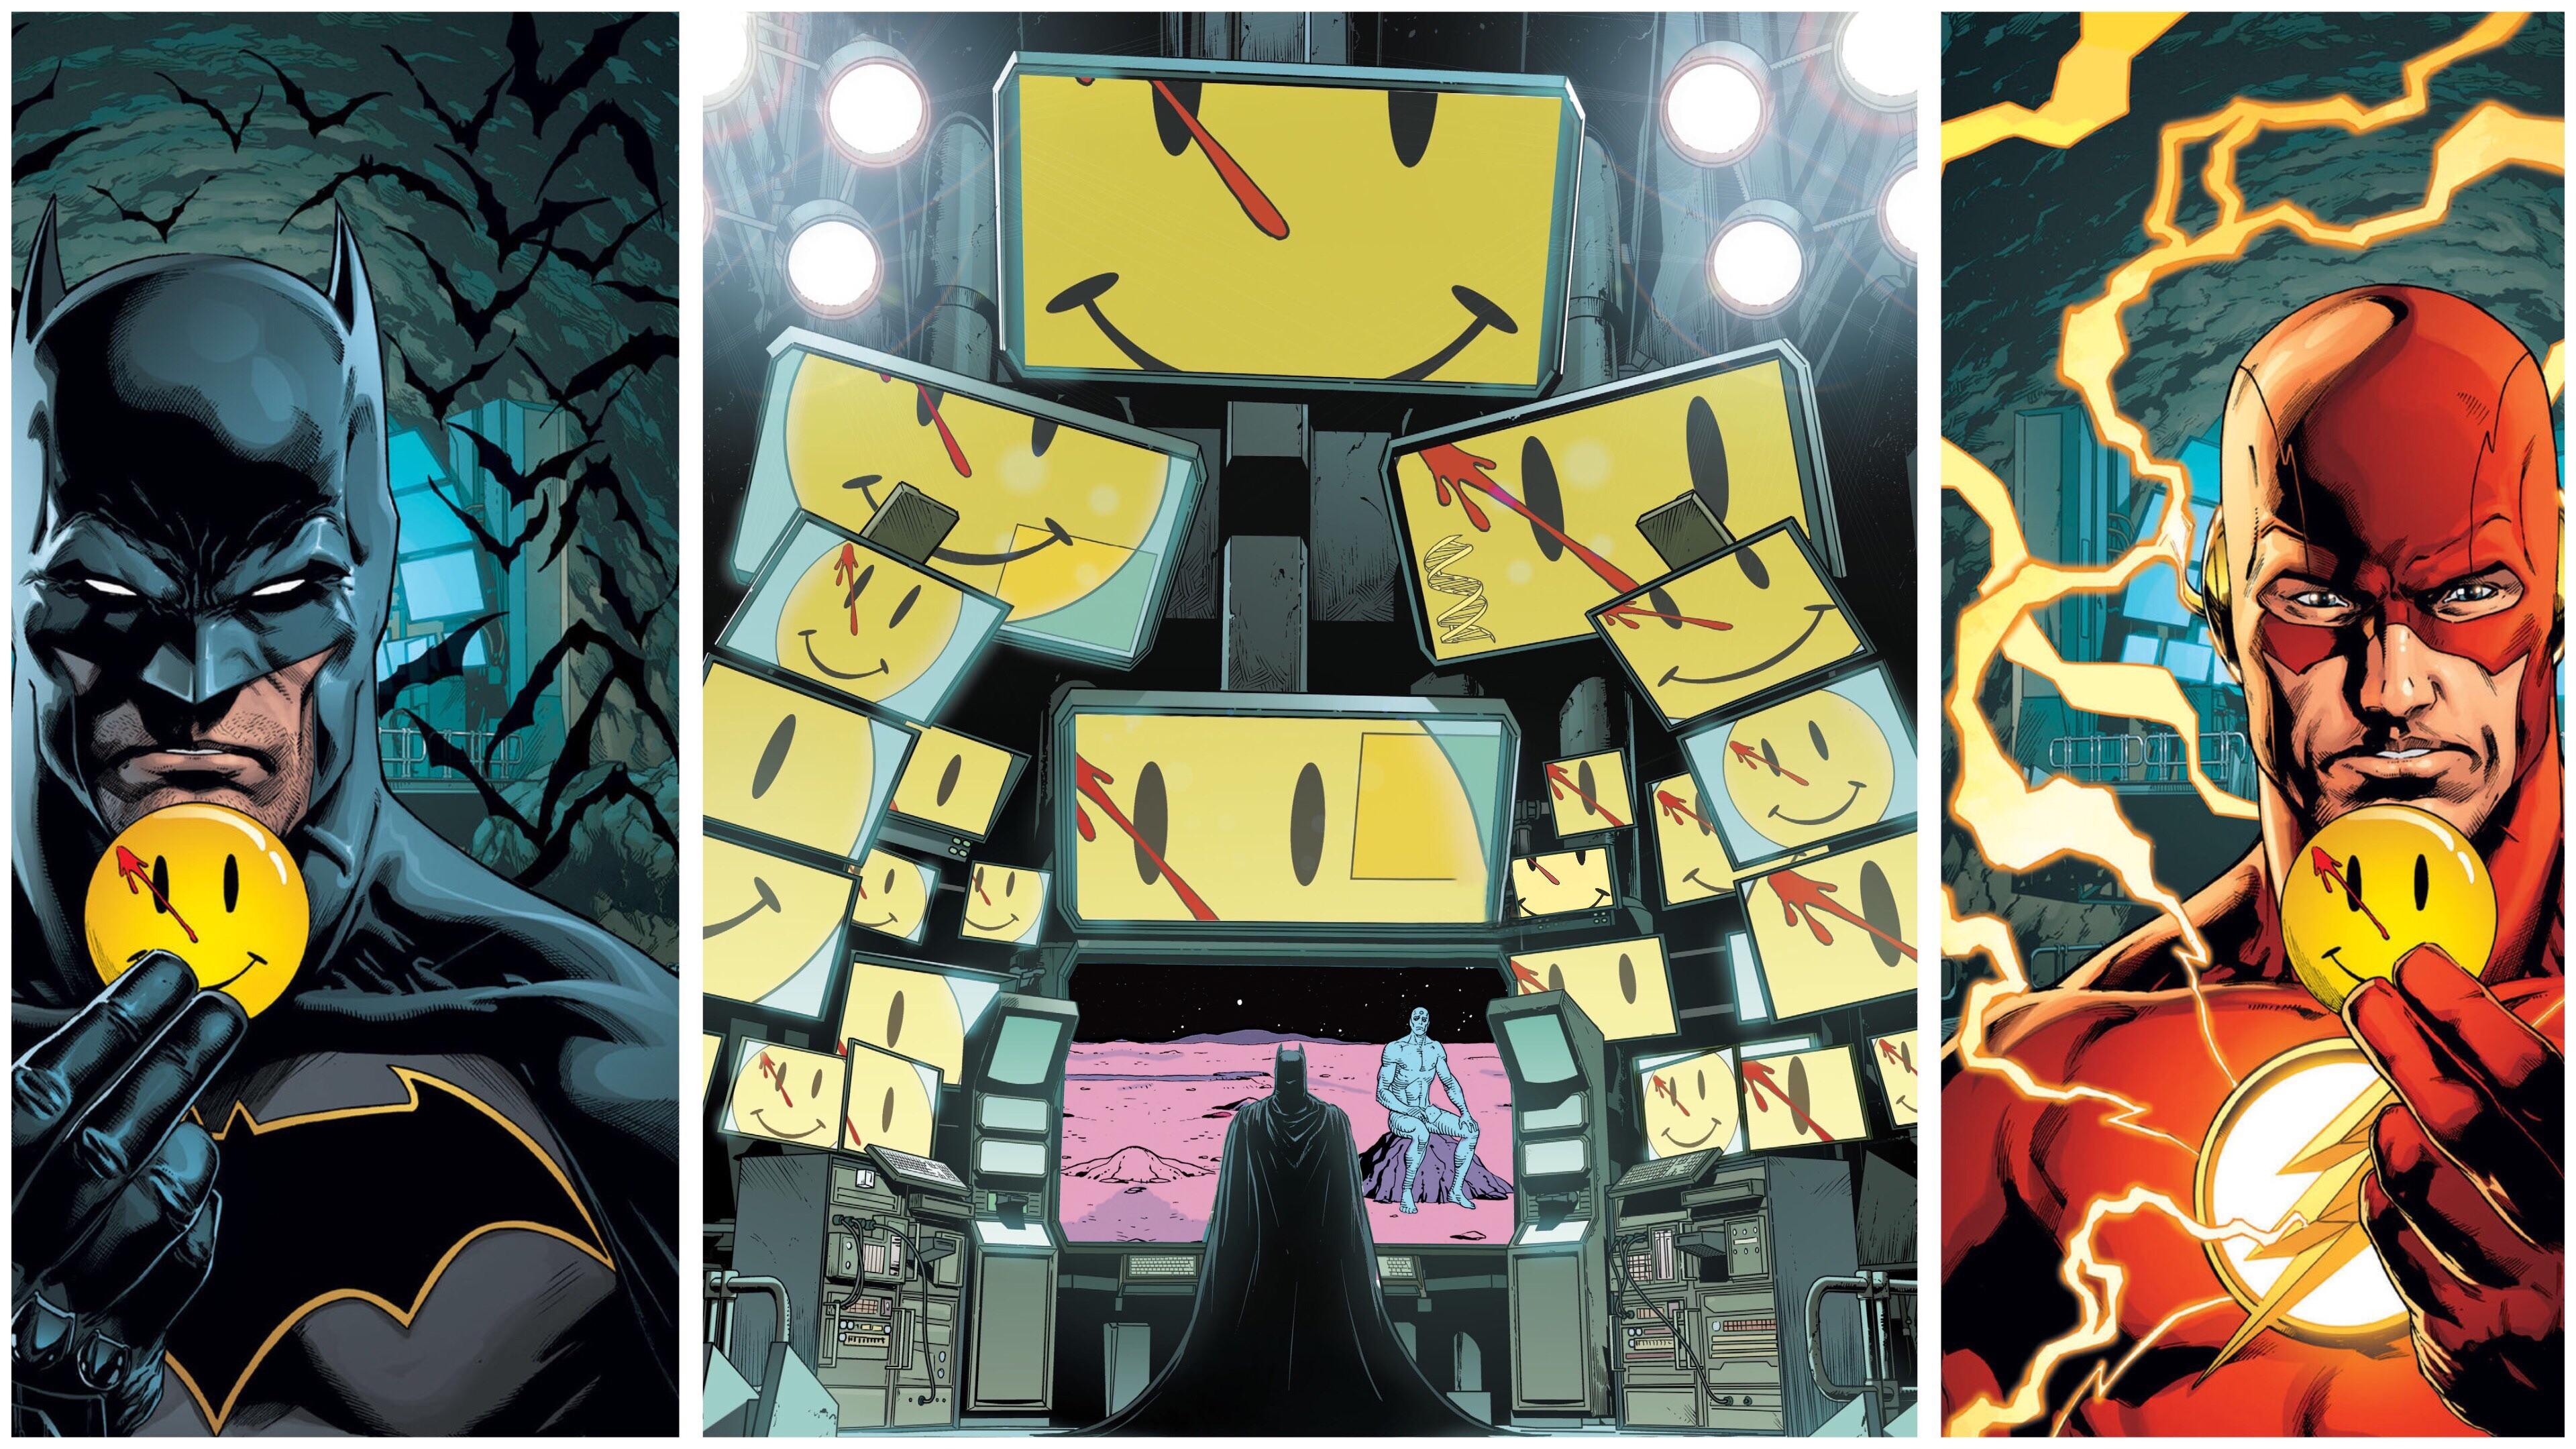 Who watches the Watchmen? The goddamn Batman does. wallpaper